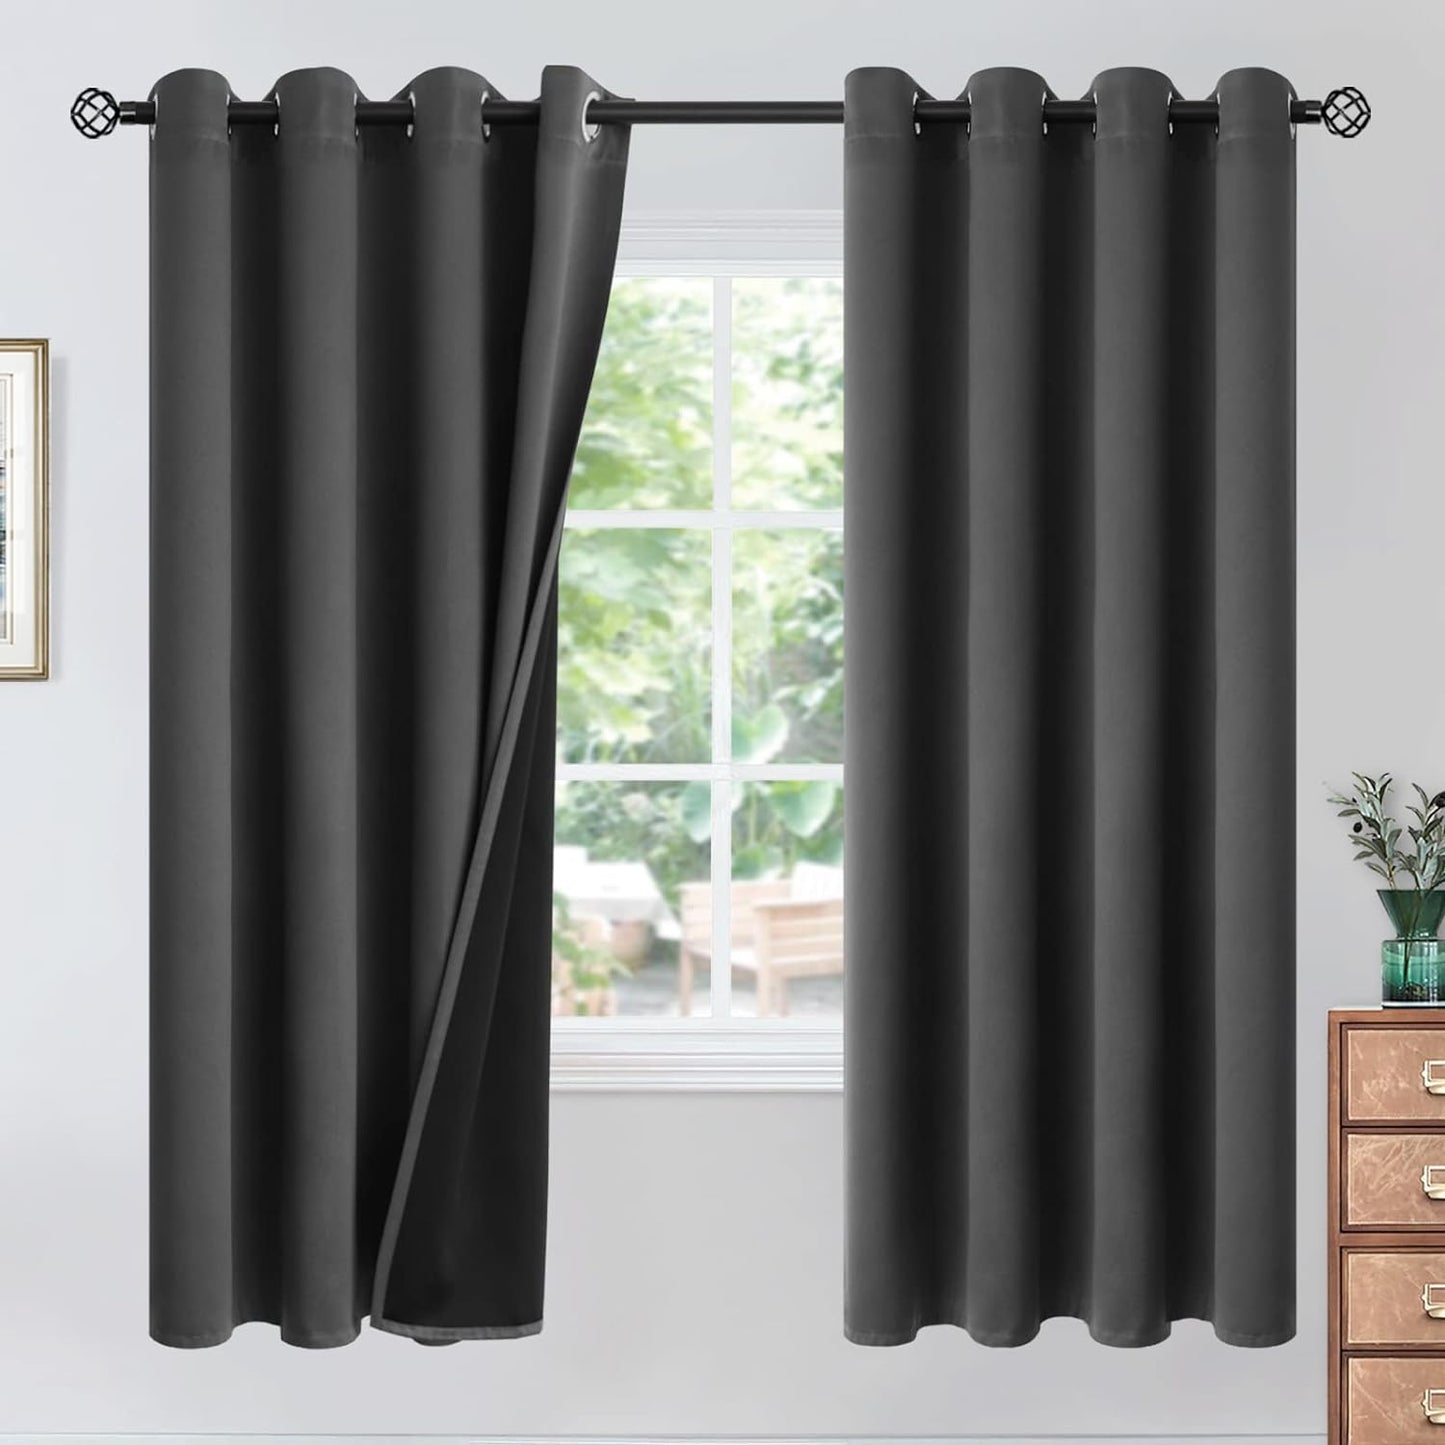 Youngstex Black 100% Blackout Curtains 63 Inches for Bedroom Thermal Insulated Total Room Darkening Curtains for Living Room Window with Black Back Grommet, 2 Panels, 42 X 63 Inch  YoungsTex Dark Grey 52W X 72L 